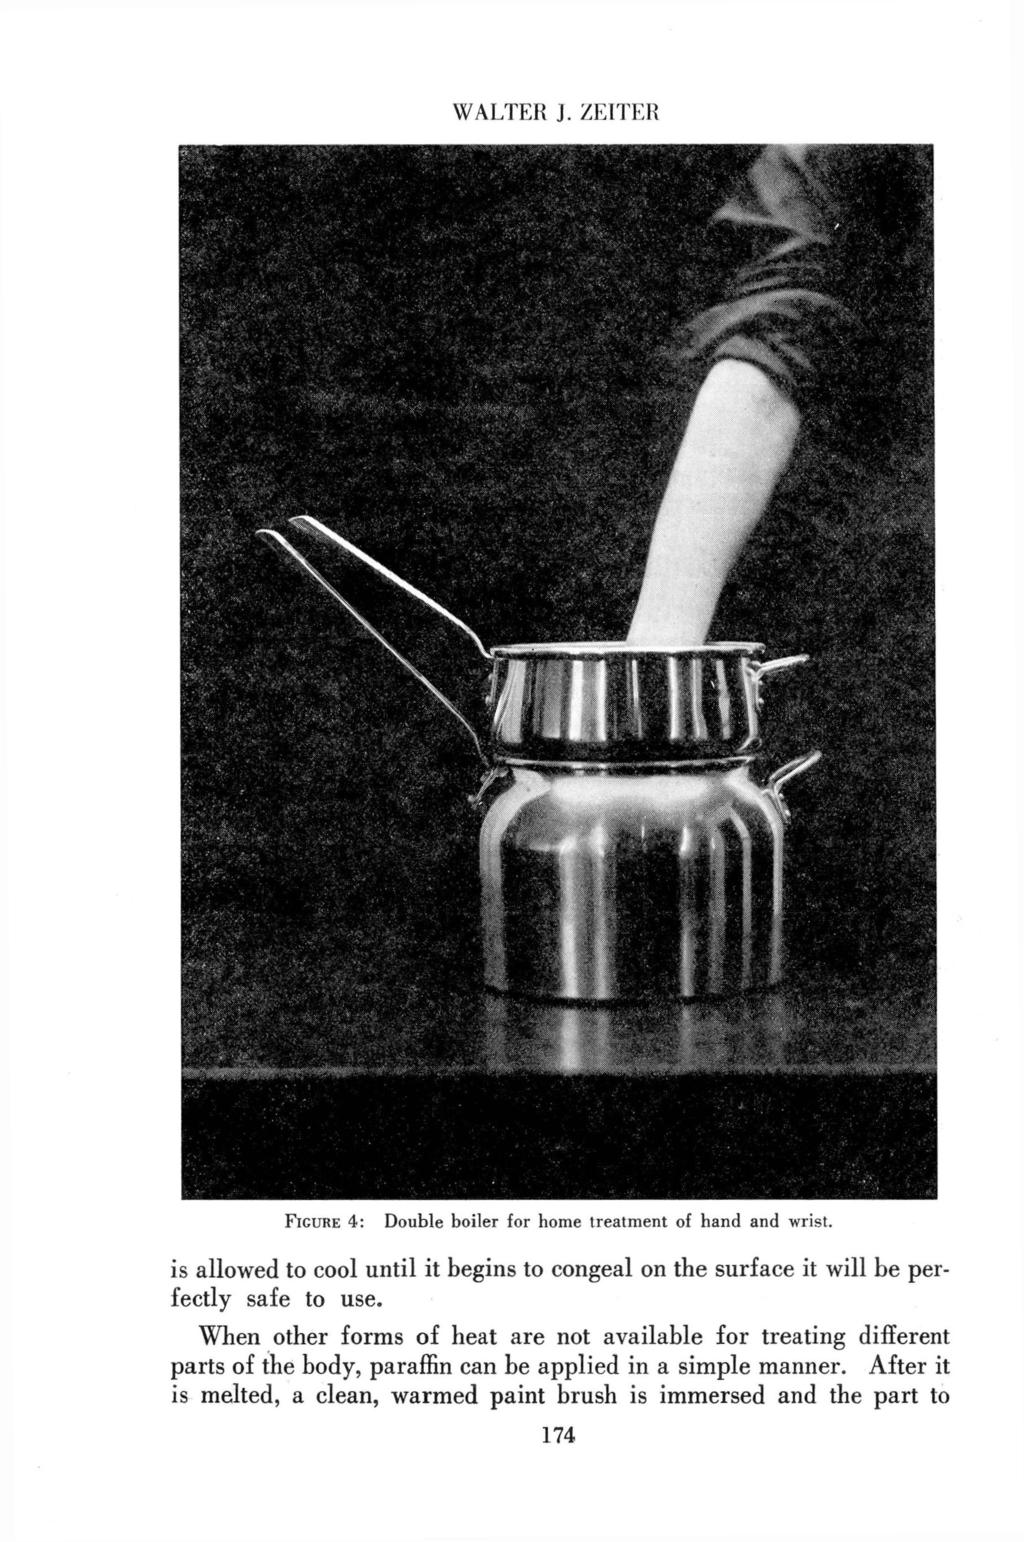 WALTER J. ZEITER FIGURE 4: Double boiler for home treatment of hand and wrist. is allowed to cool until it begins to congeal on the surface it will be perfectly safe to use.